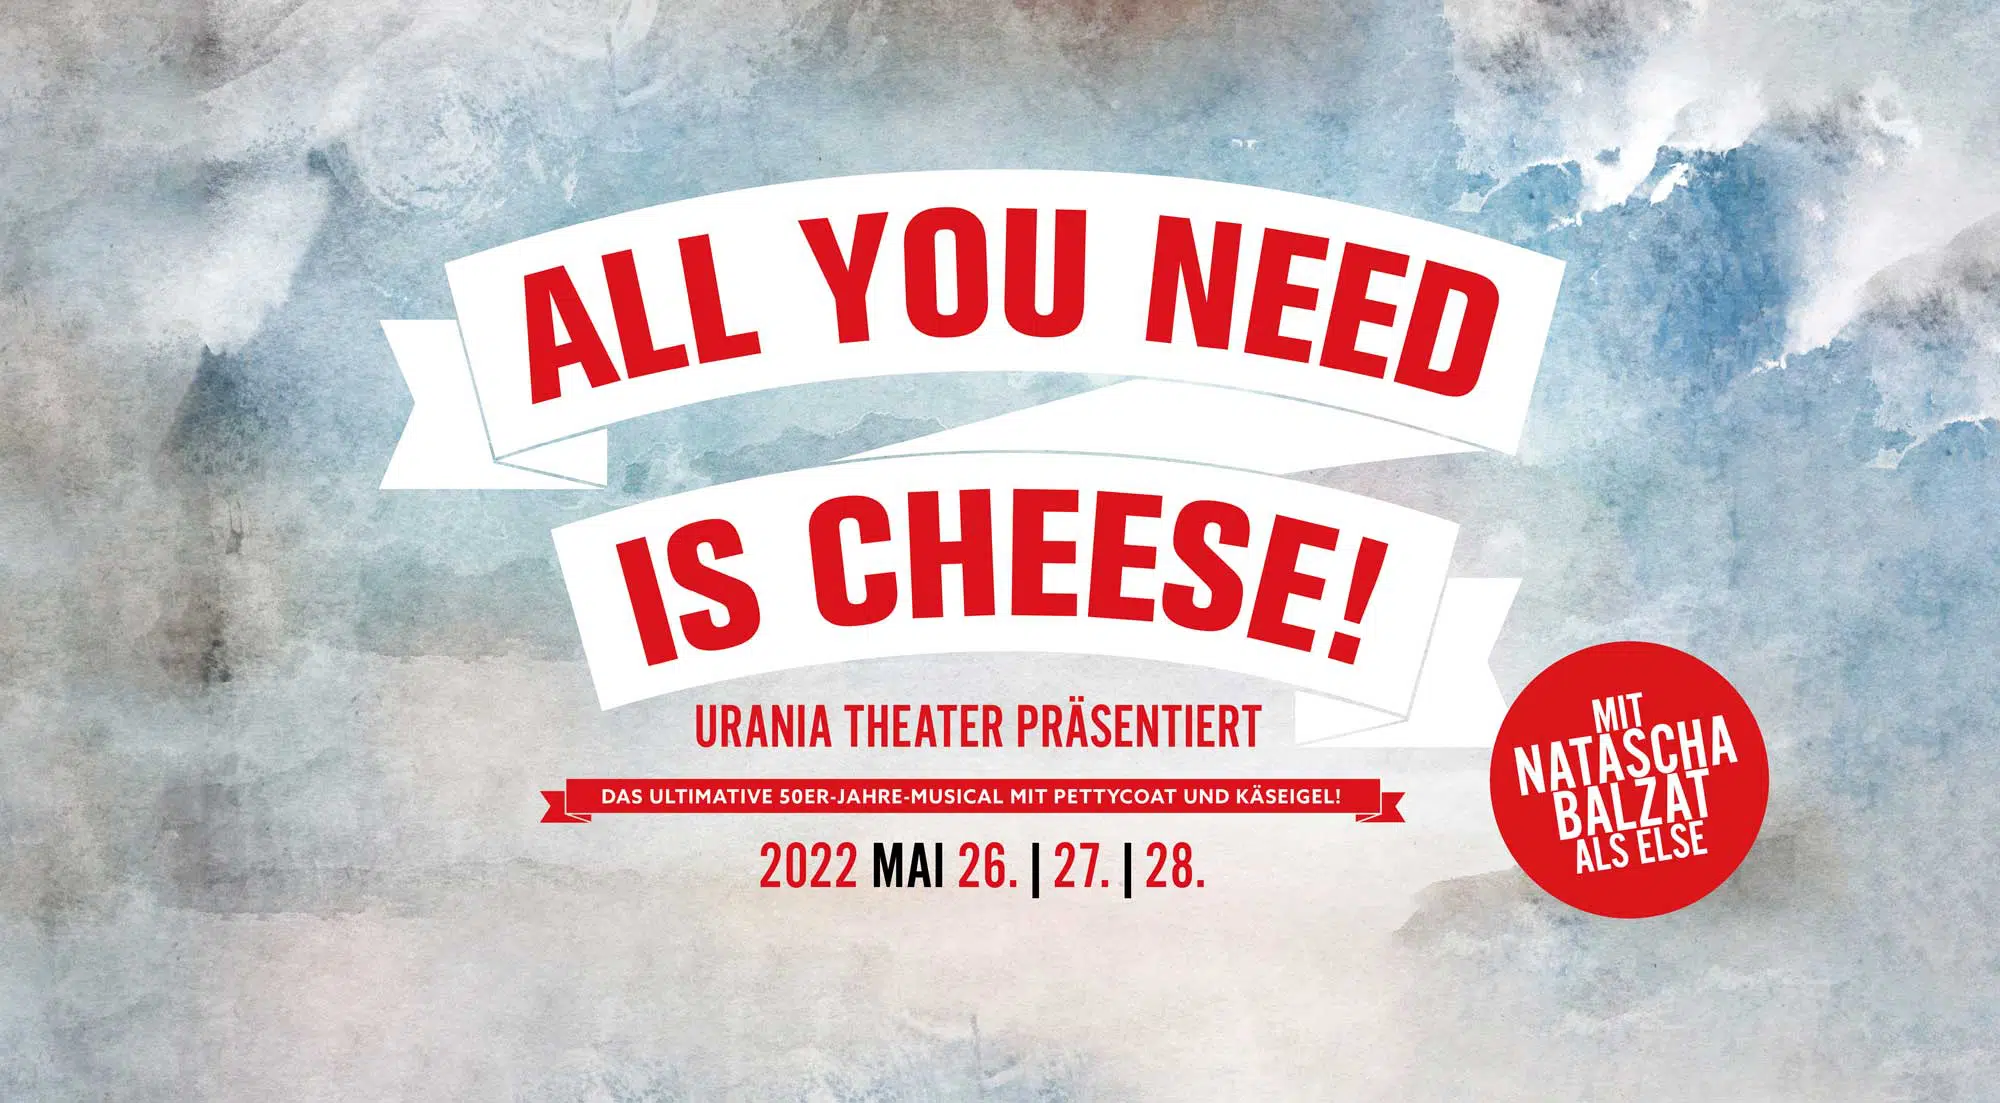 All you need is cheese urania 2022 fb banner2 1